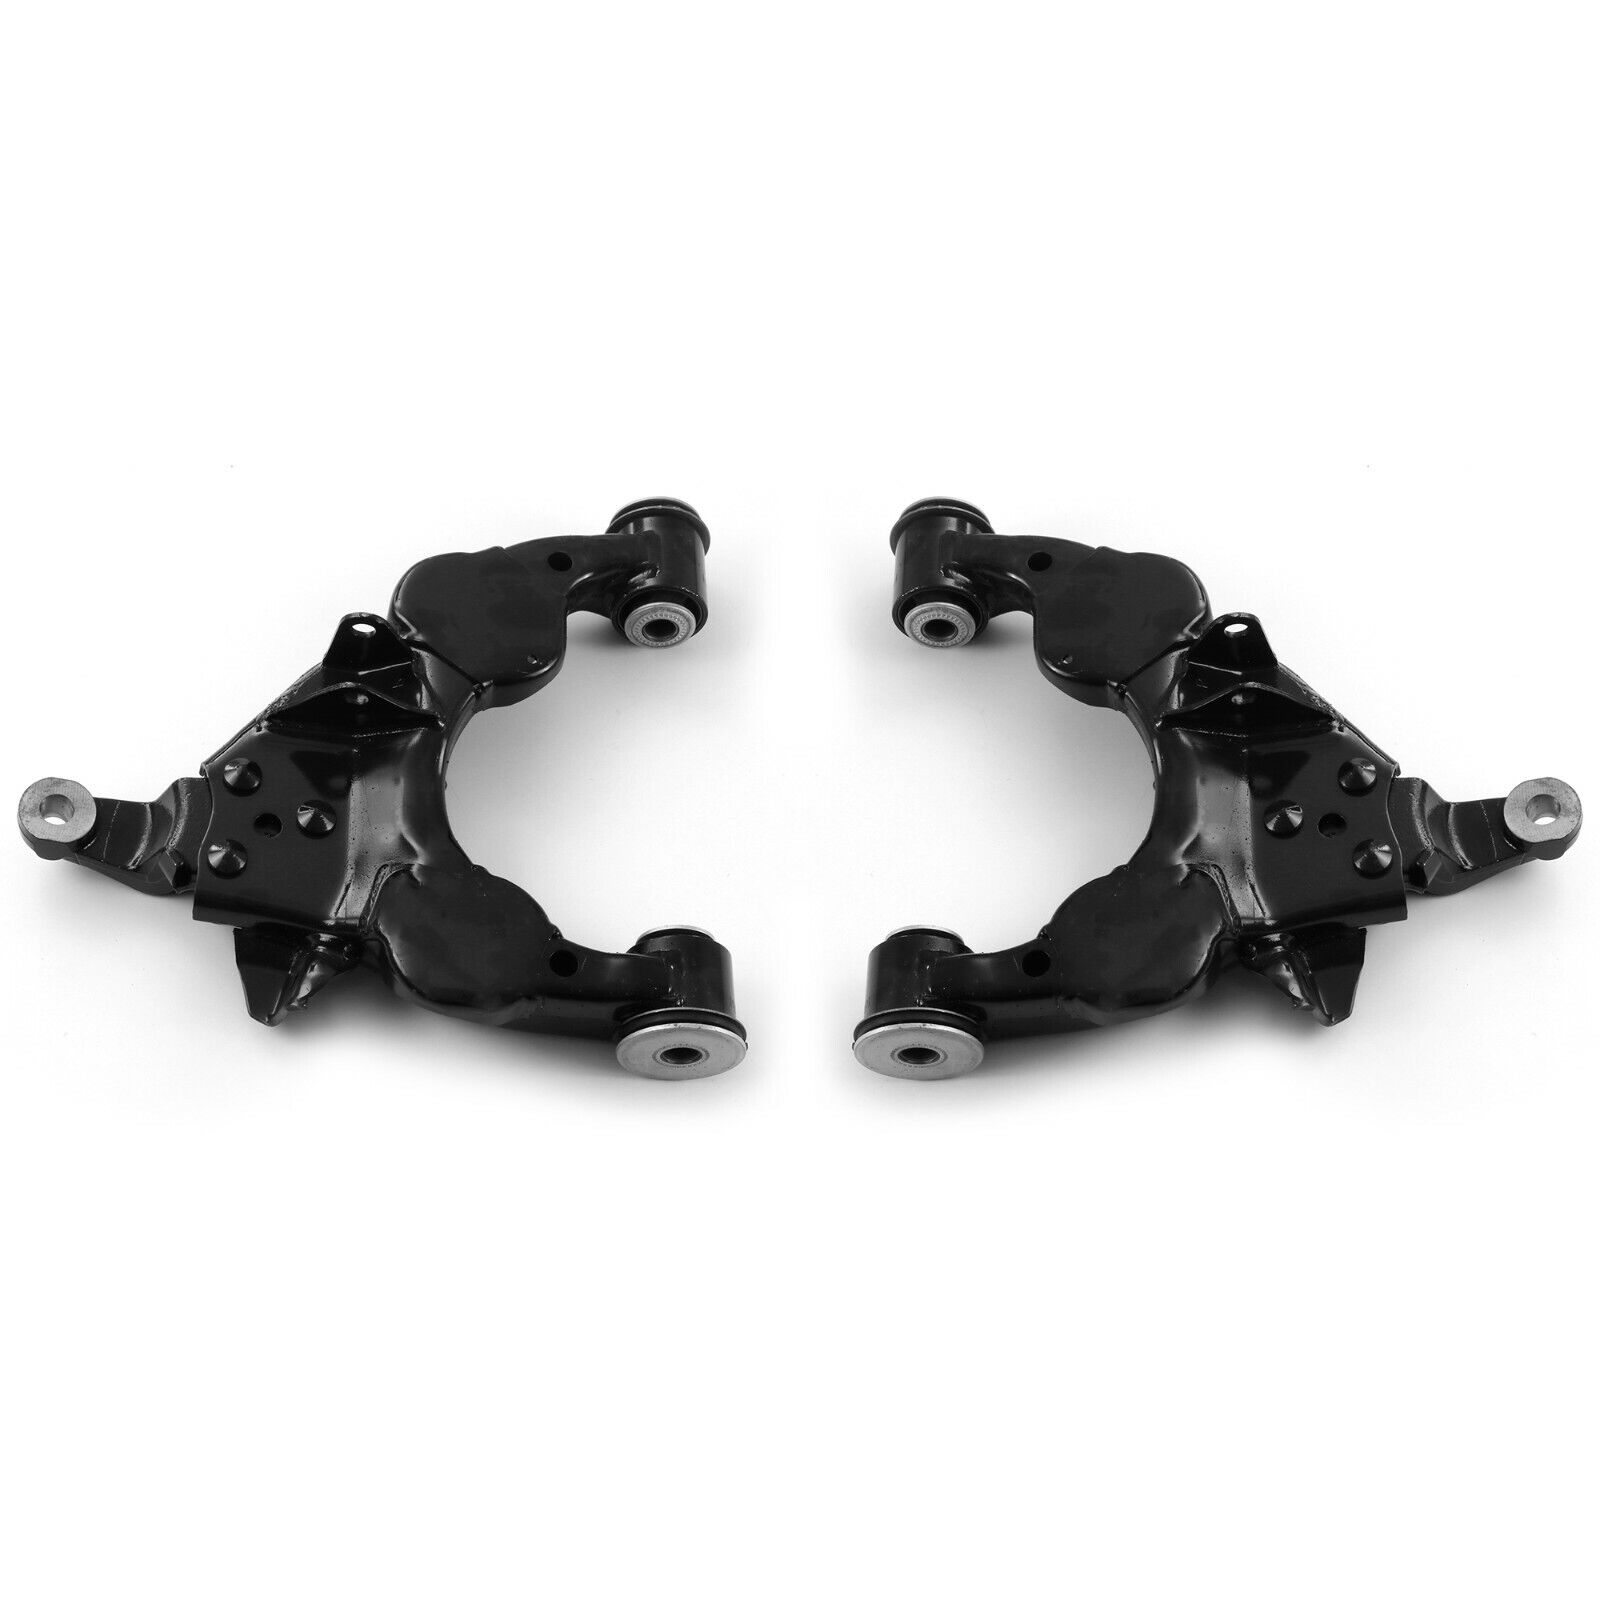 Front Left & Right Lower Control Arms Set For 2000-2003 Toyota Sequoia Tundra